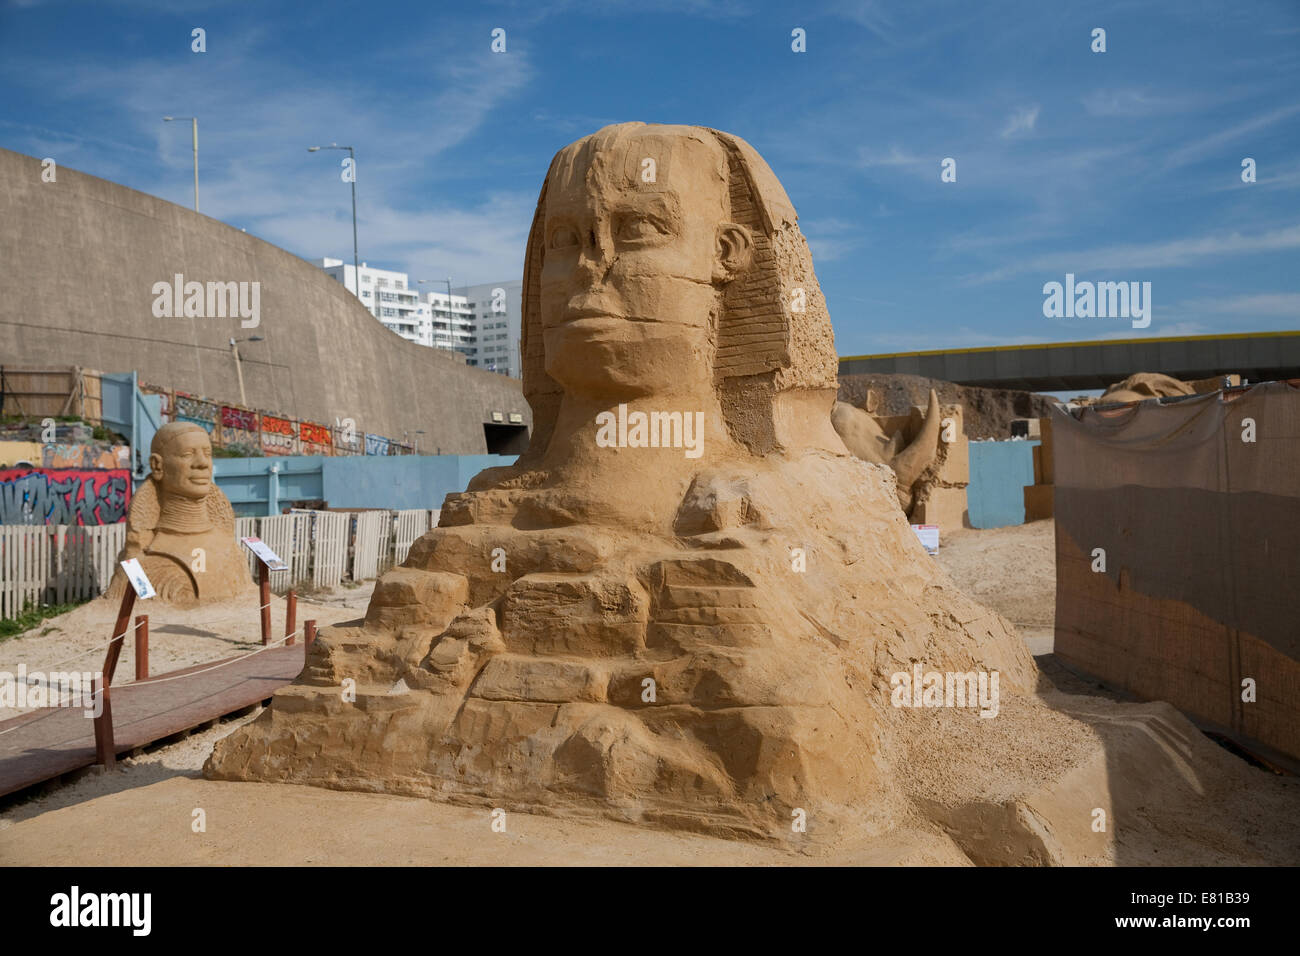 The Sphinx of Giza in Egypt on display at the Sand Sculpture festival in Brighton Stock Photo